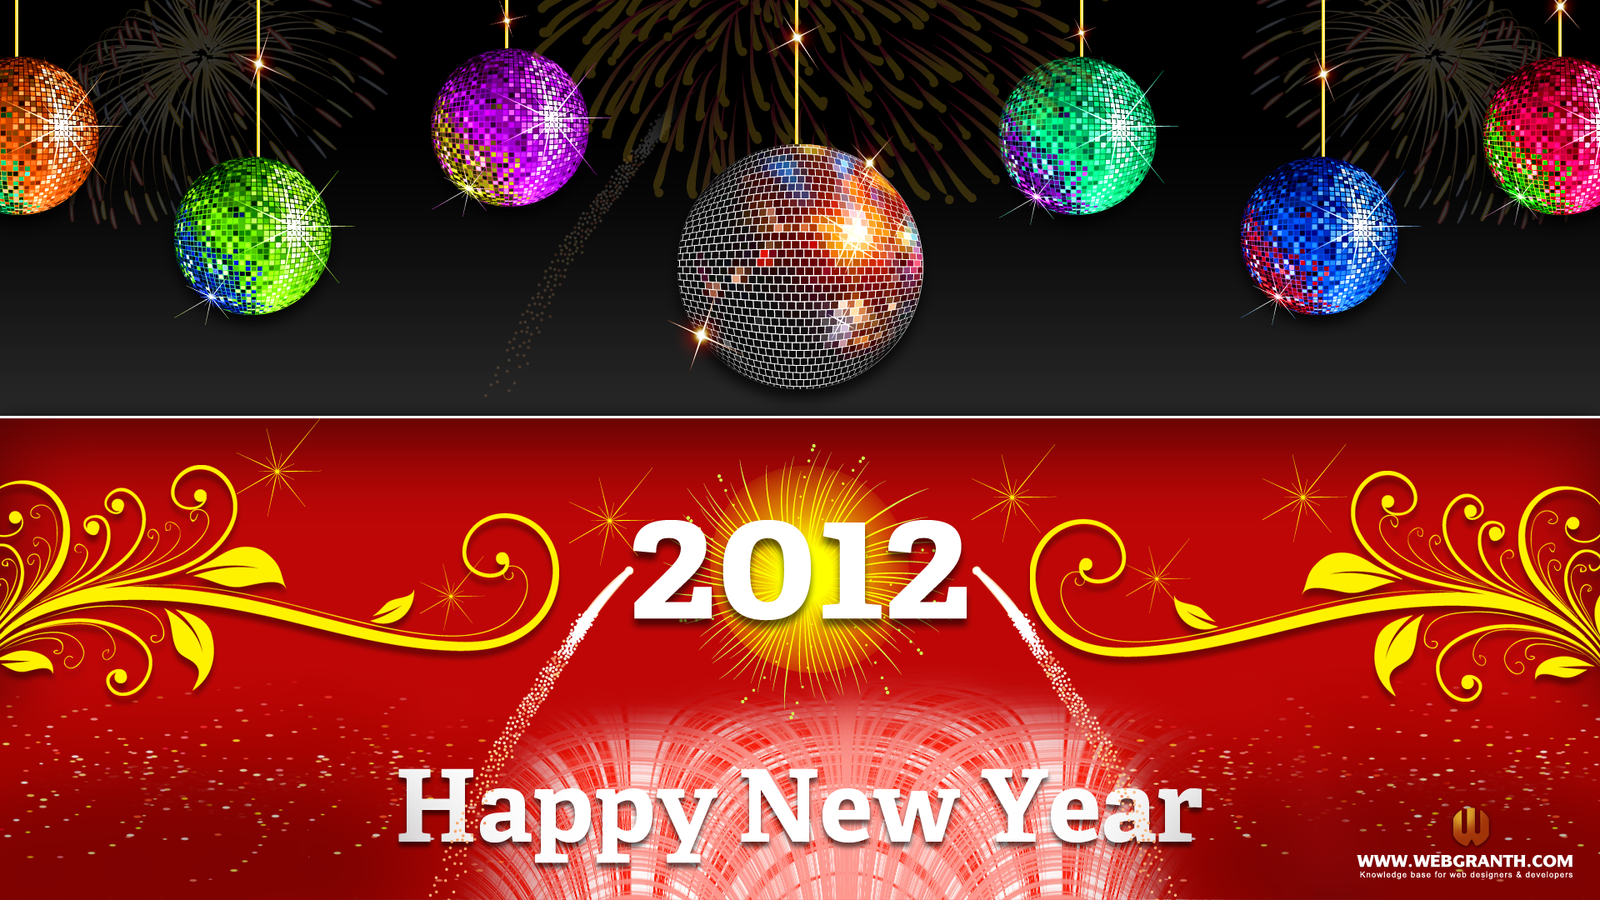 http://www.webgranth.com/wp-content/uploads/2011/10/new-year-wallpaper.png